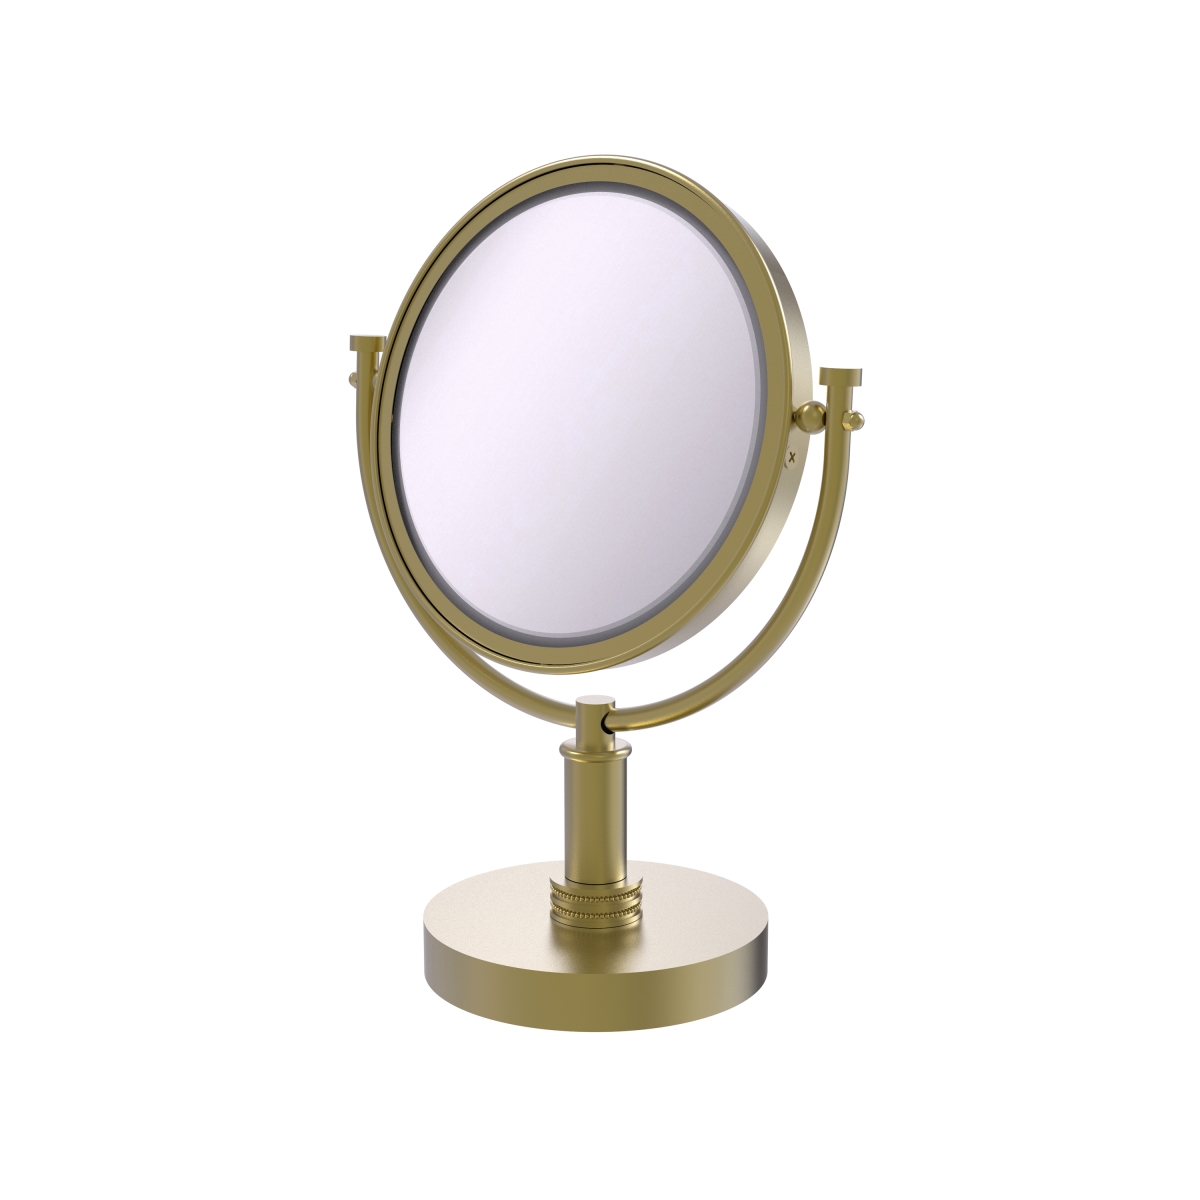 Dm-4d-4x-sbr Dotted Ring Style 8 In. Vanity Top Make-up Mirror 4x Magnification, Satin Brass